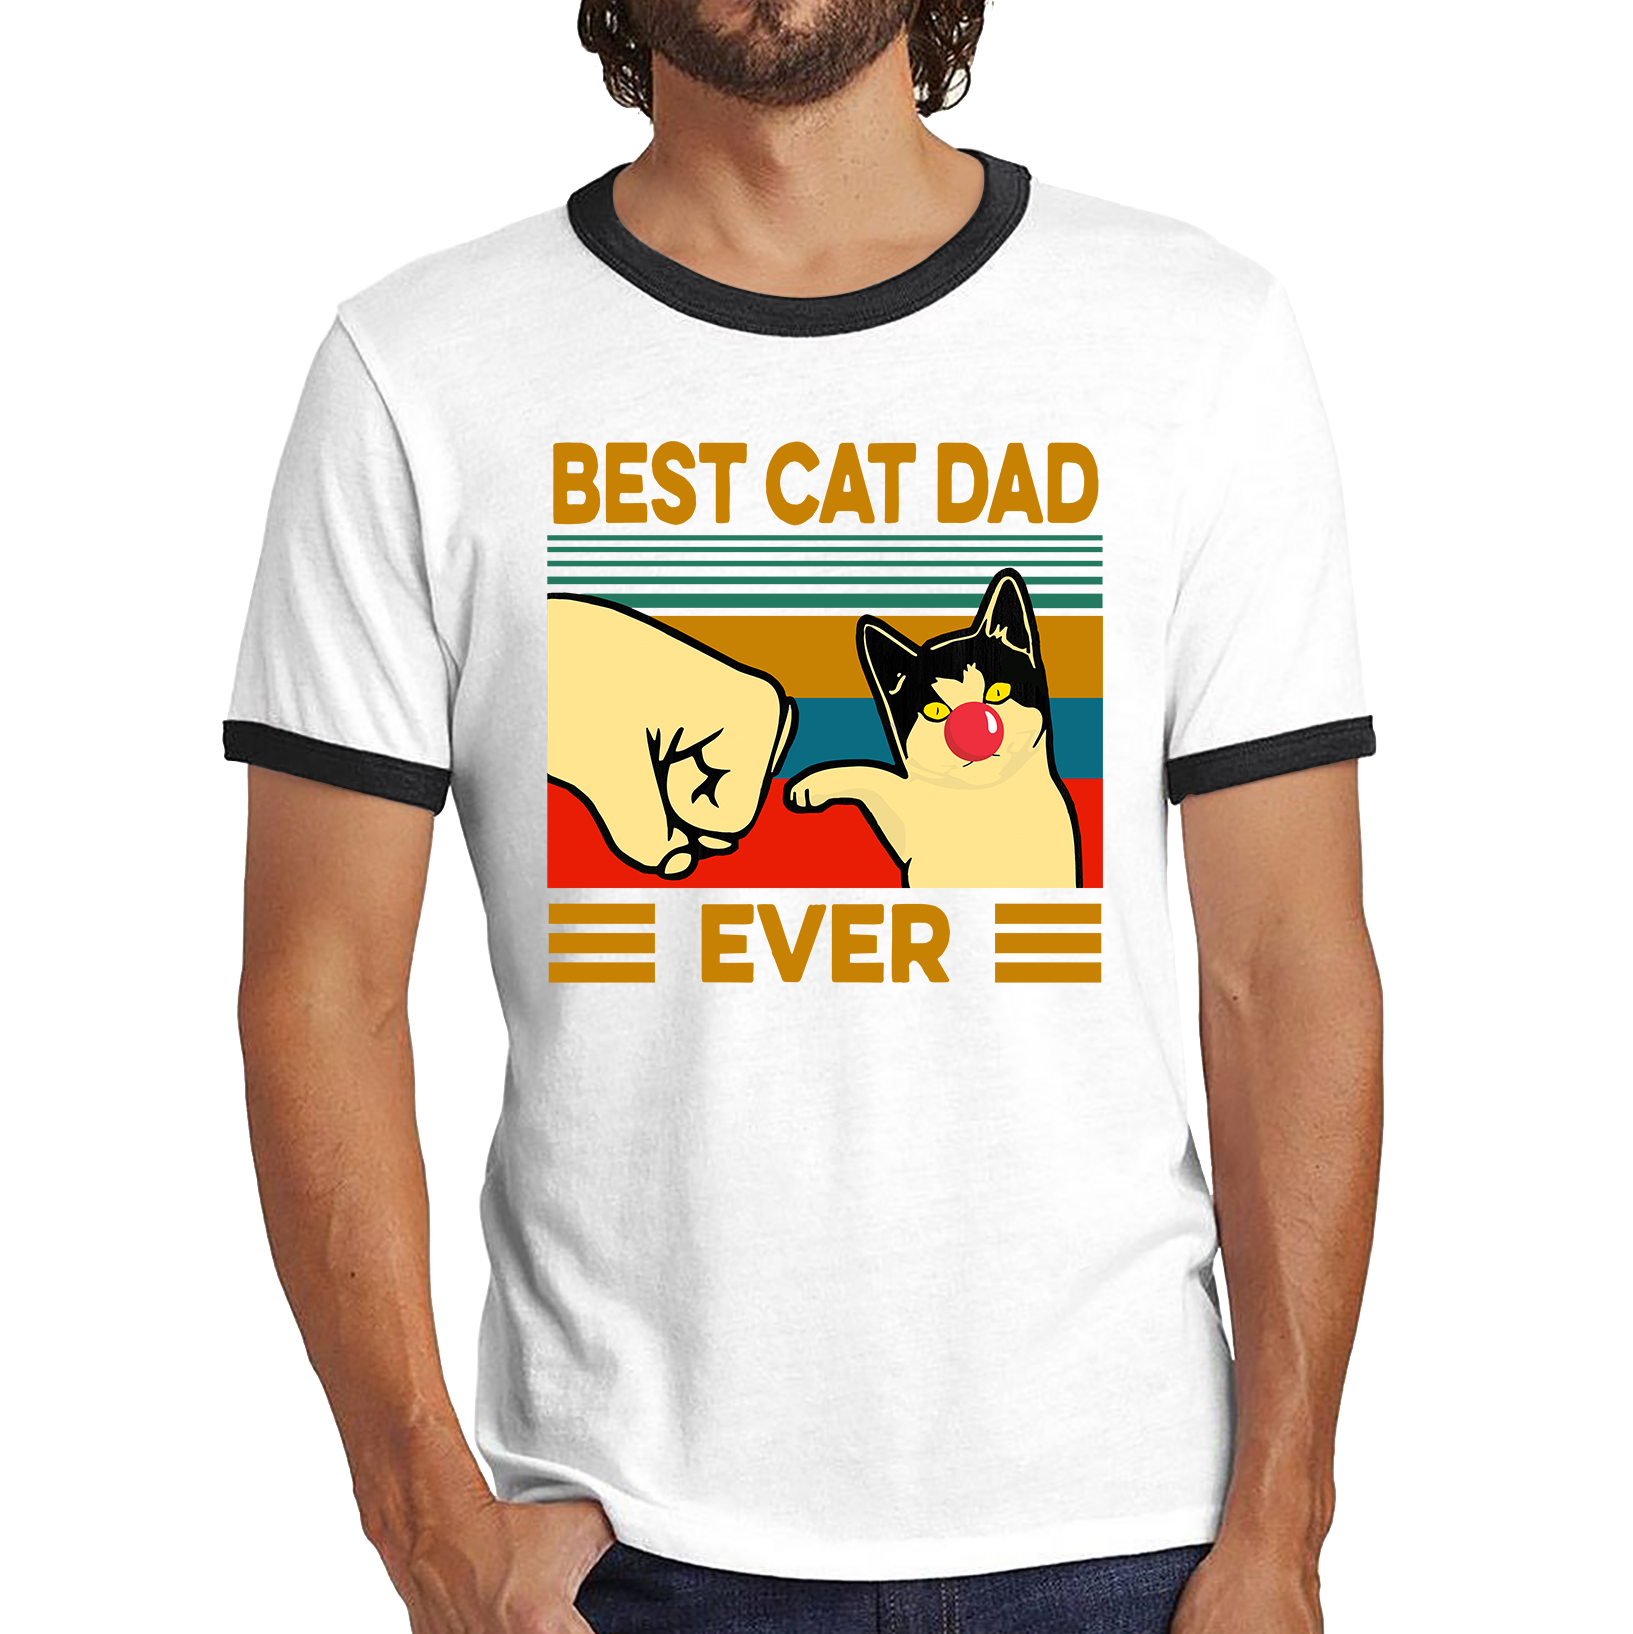 Best Cat Dad Ever Red Nose Day Ringer T Shirt. 50% Goes To Charity